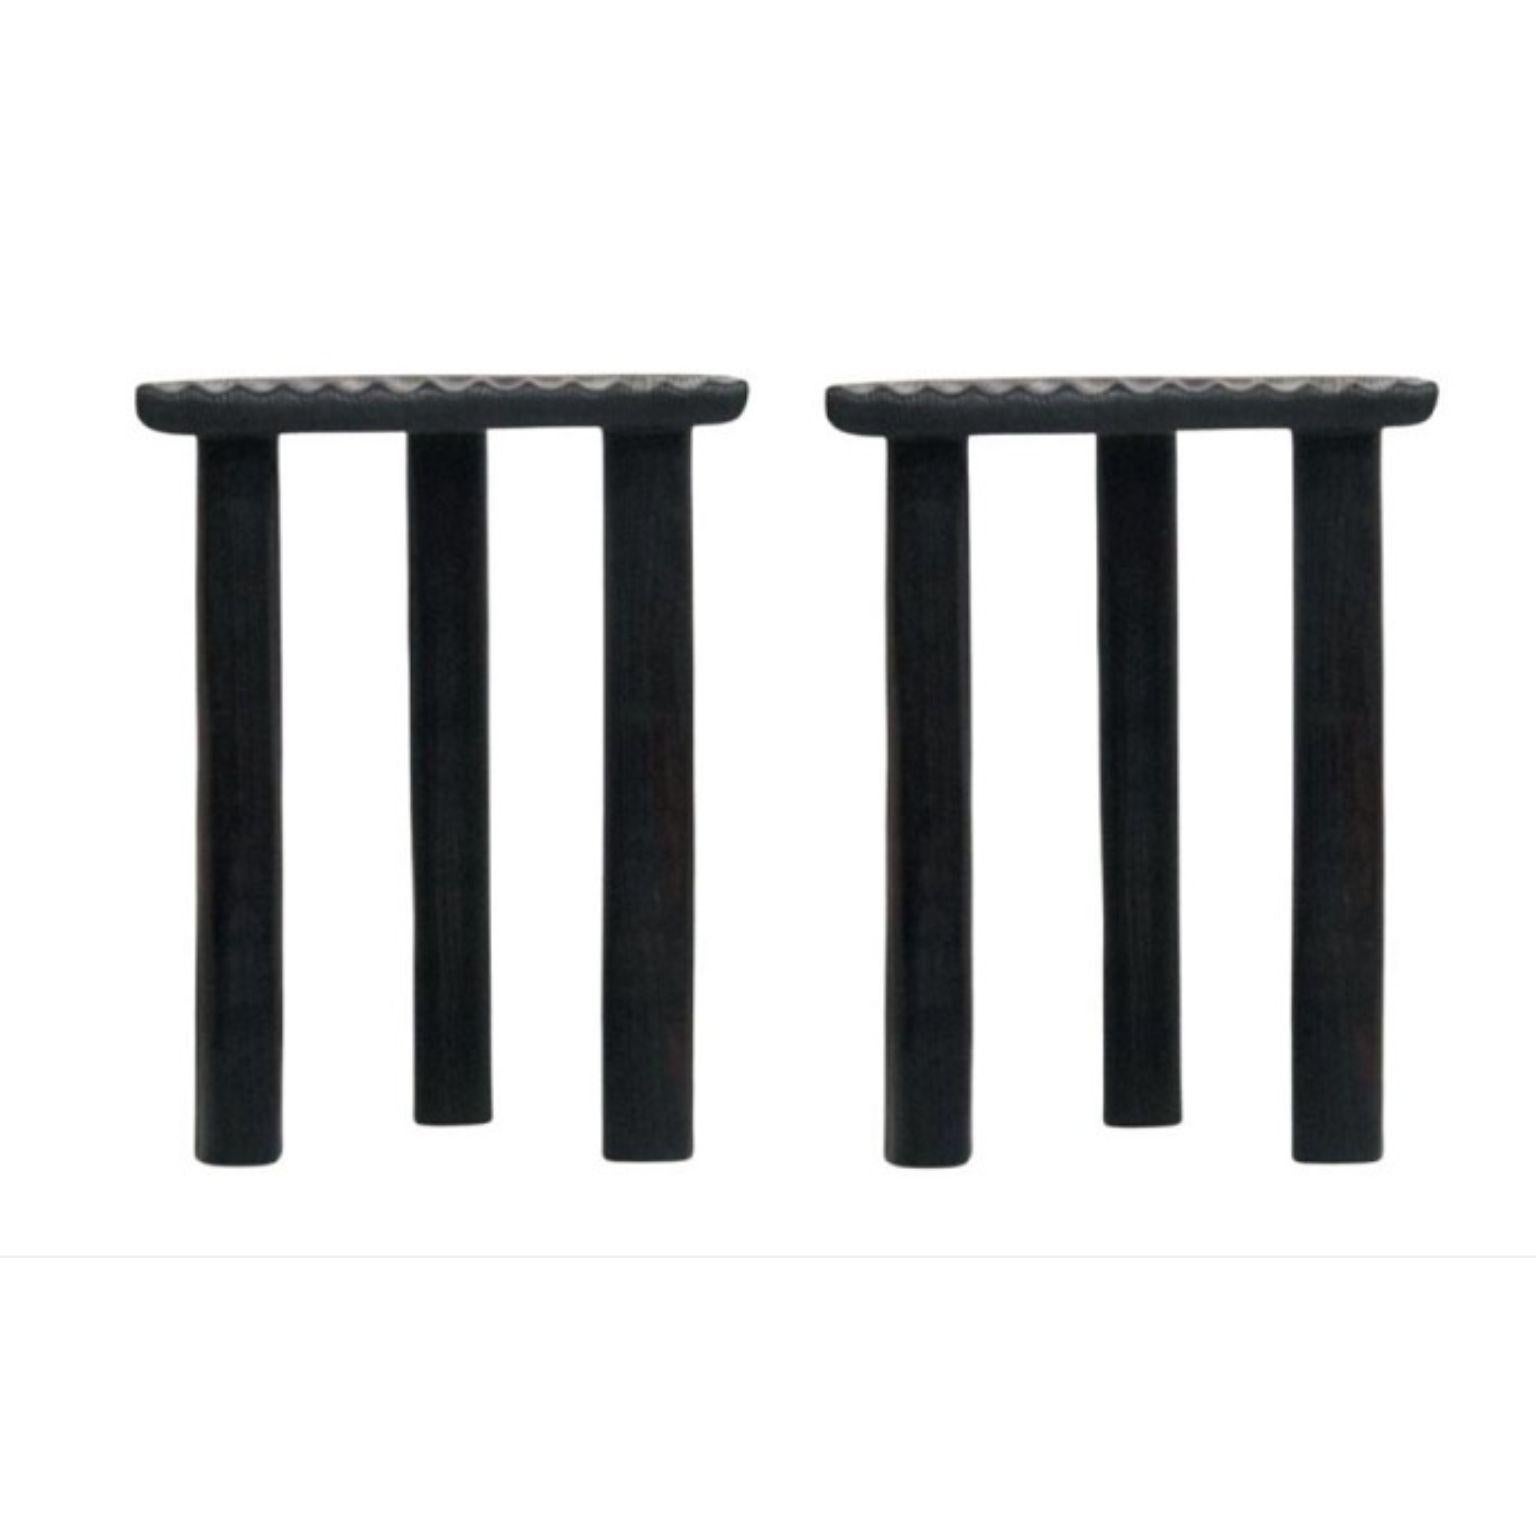 Set of 2 black Fingerprint stools by Victor Hahner
Each piece is unique, handmade by the designer and signed
Dimensions: W 39,5 x D 27 x H 49 cm
Materials: burned / waxed white ash

Also available: white and blue fingerprint stool.

Victor